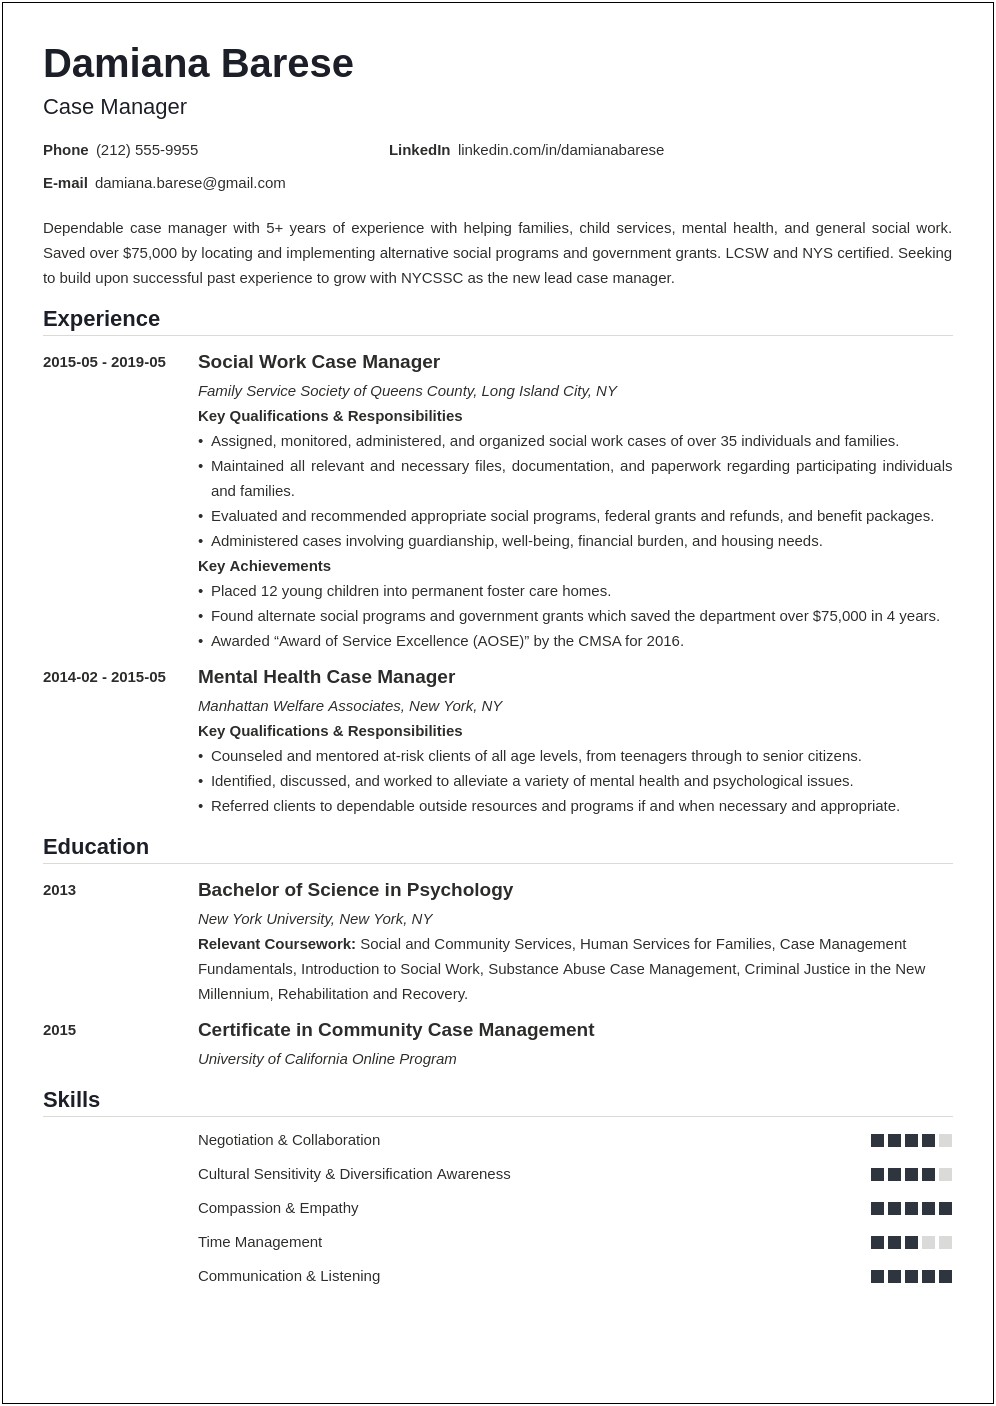 Resume Objective Sample For Case Manager